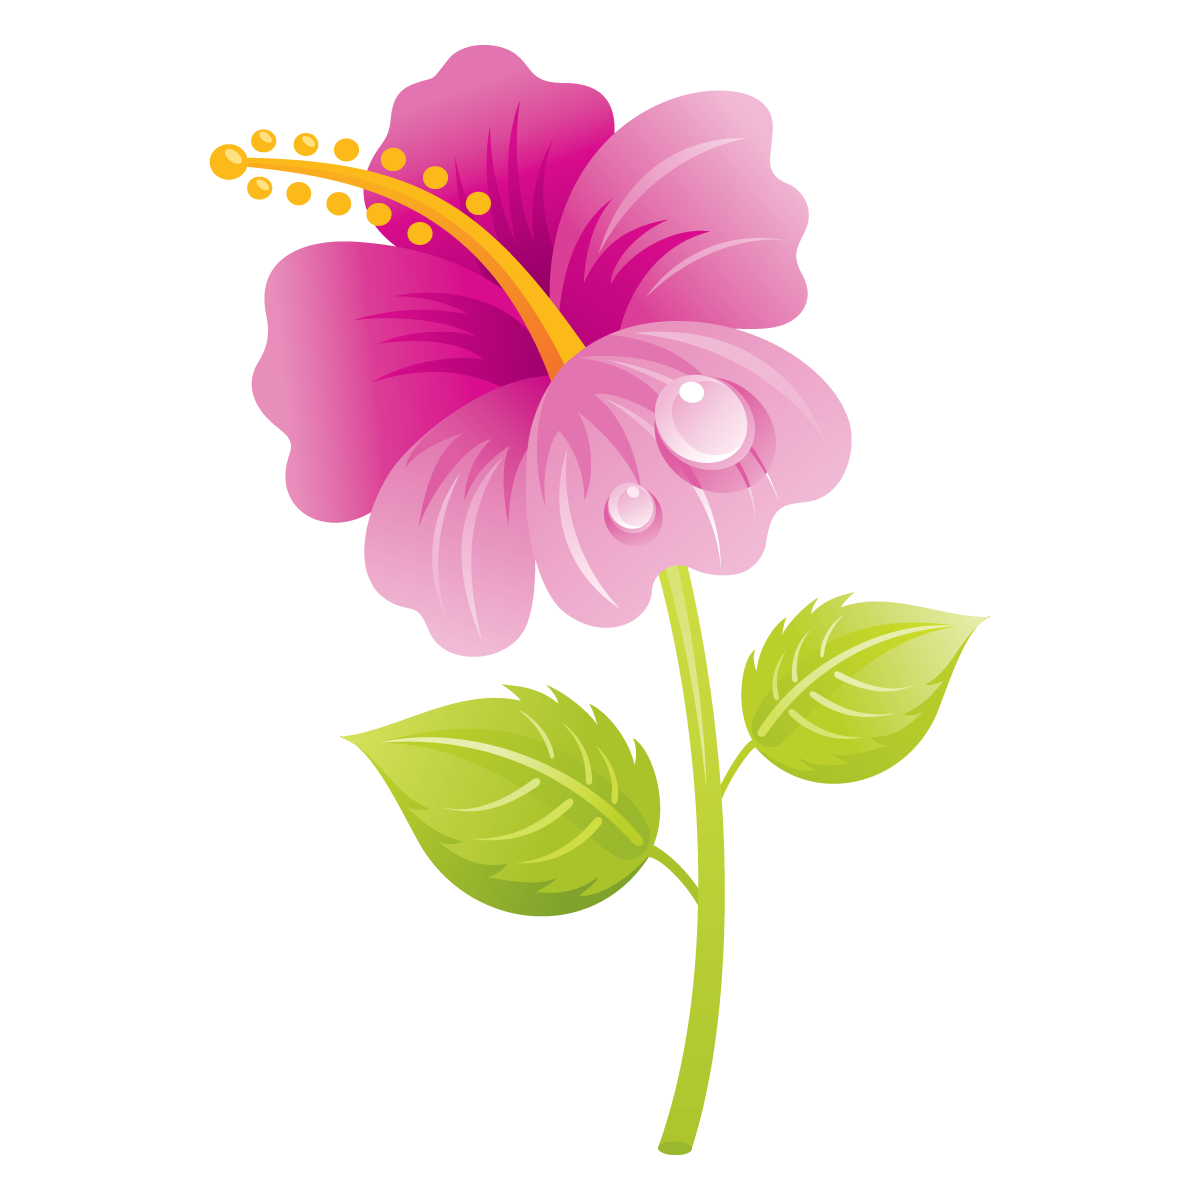 Flowers flower clip art with transparent background free